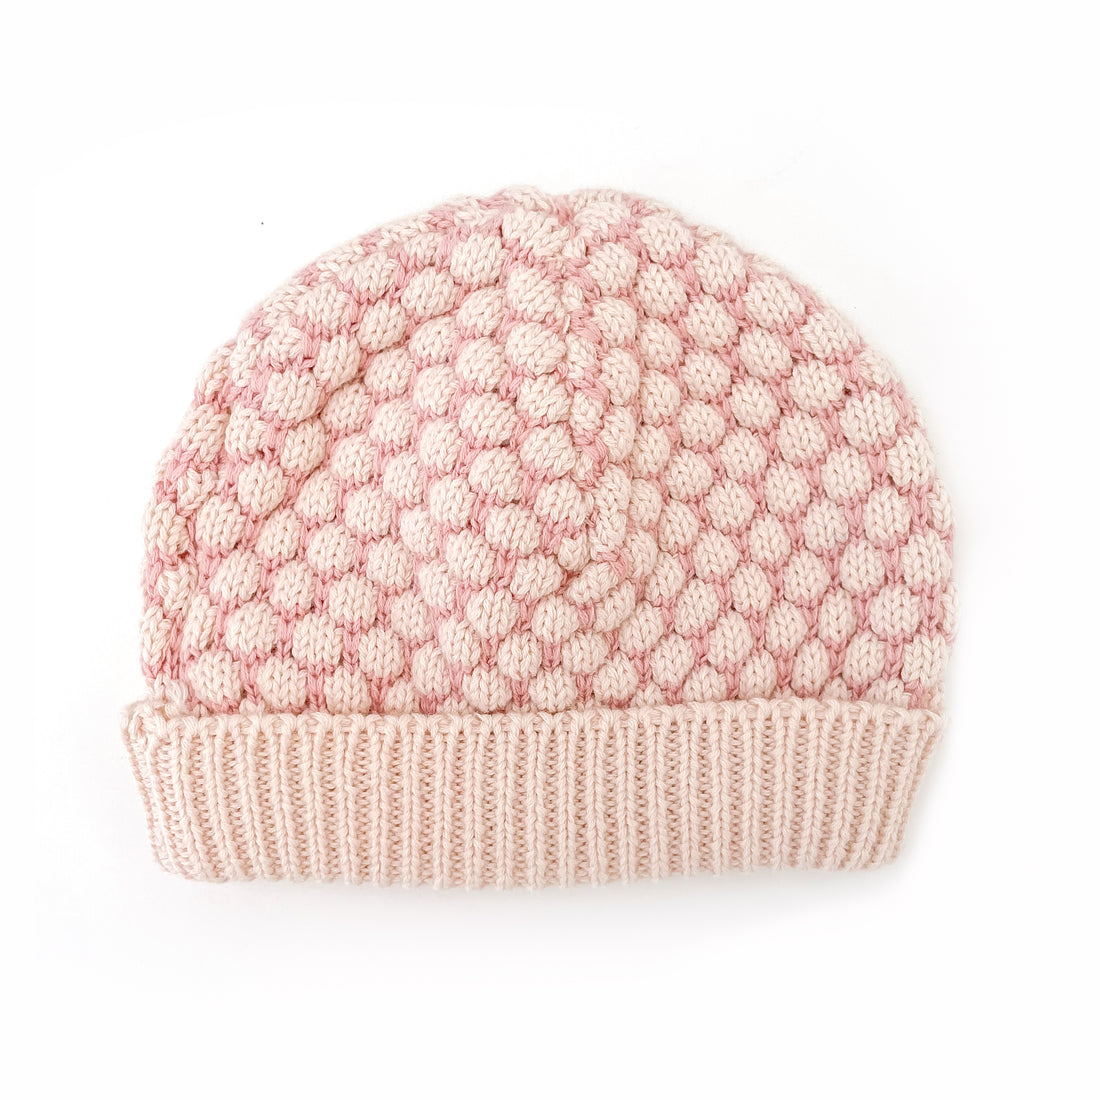 Honeycomb Knitted Beanie - CREAM/DUSTY PINK